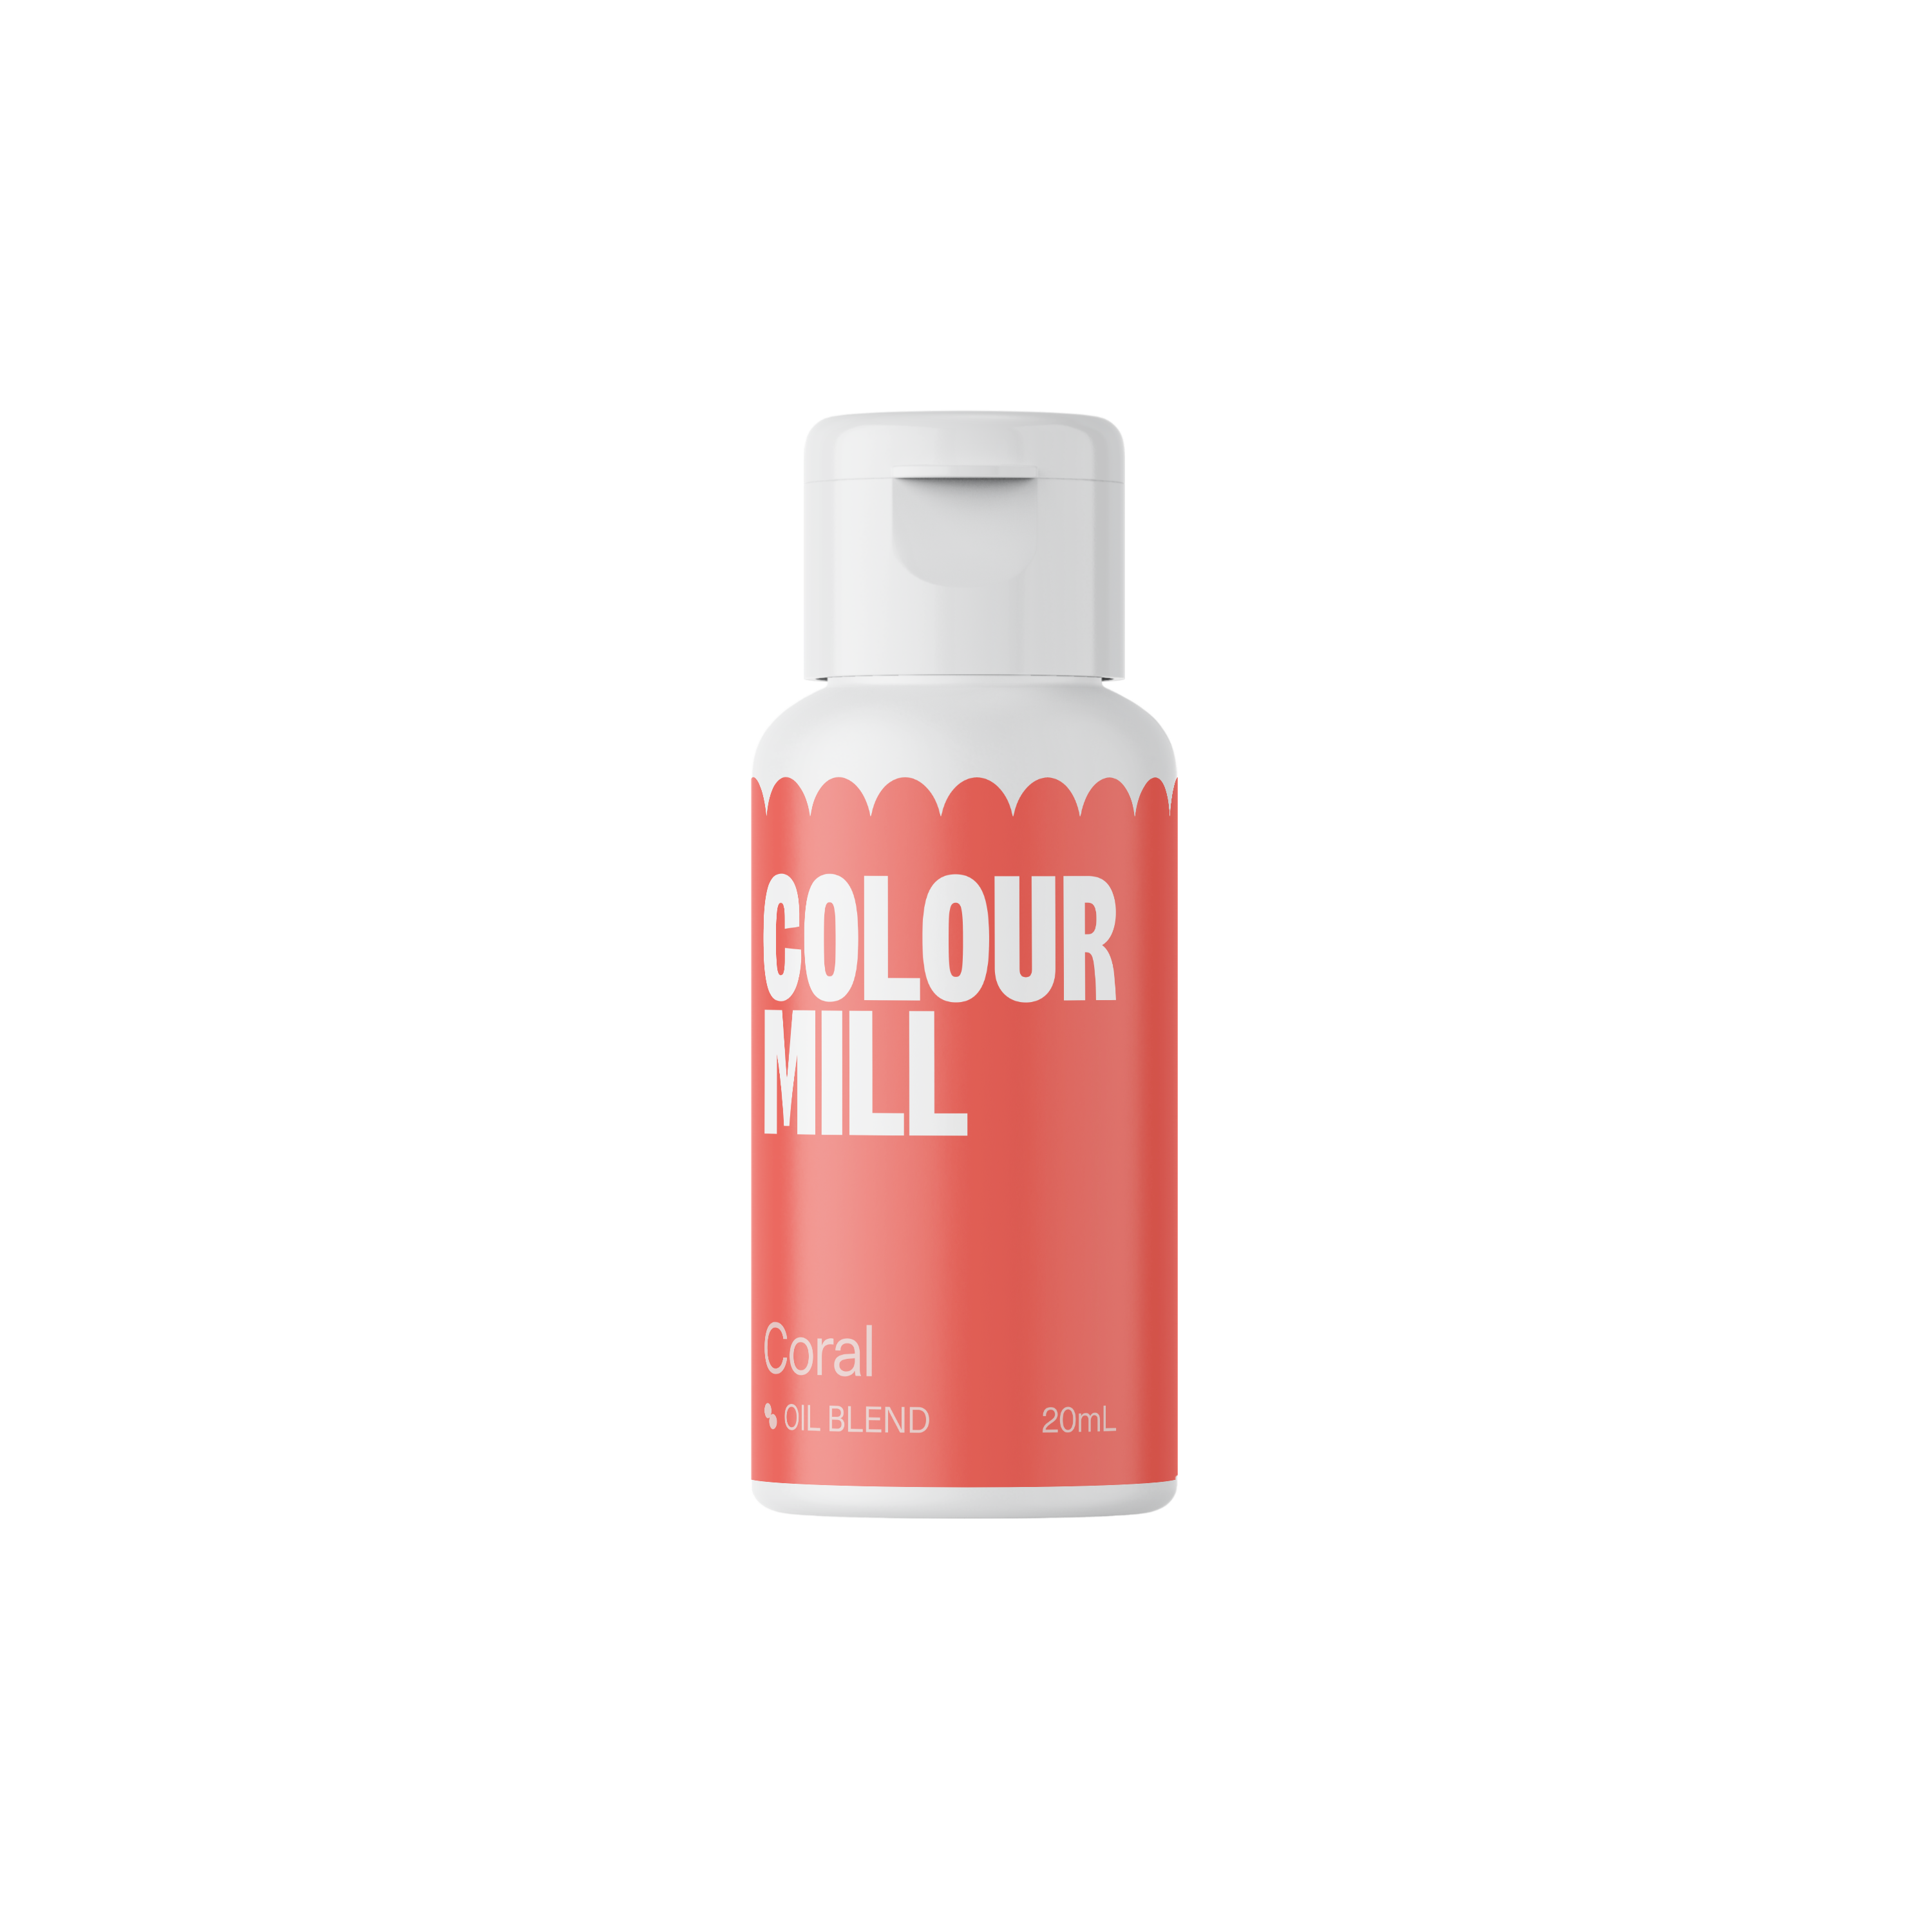 Coral - Oil Blendproduct image